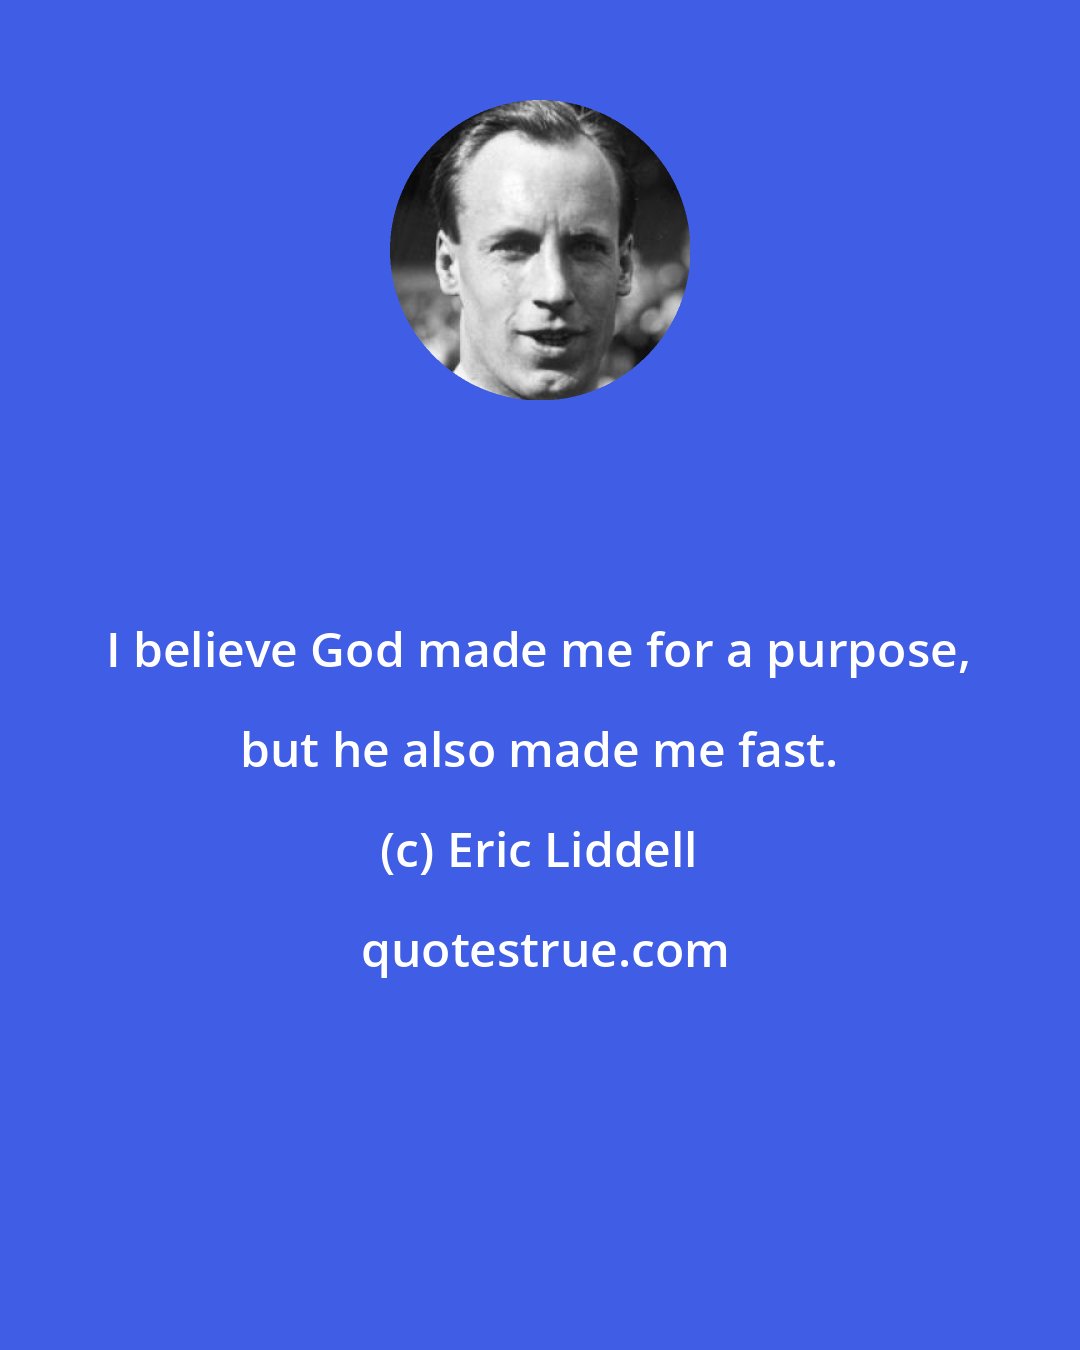 Eric Liddell: I believe God made me for a purpose, but he also made me fast.